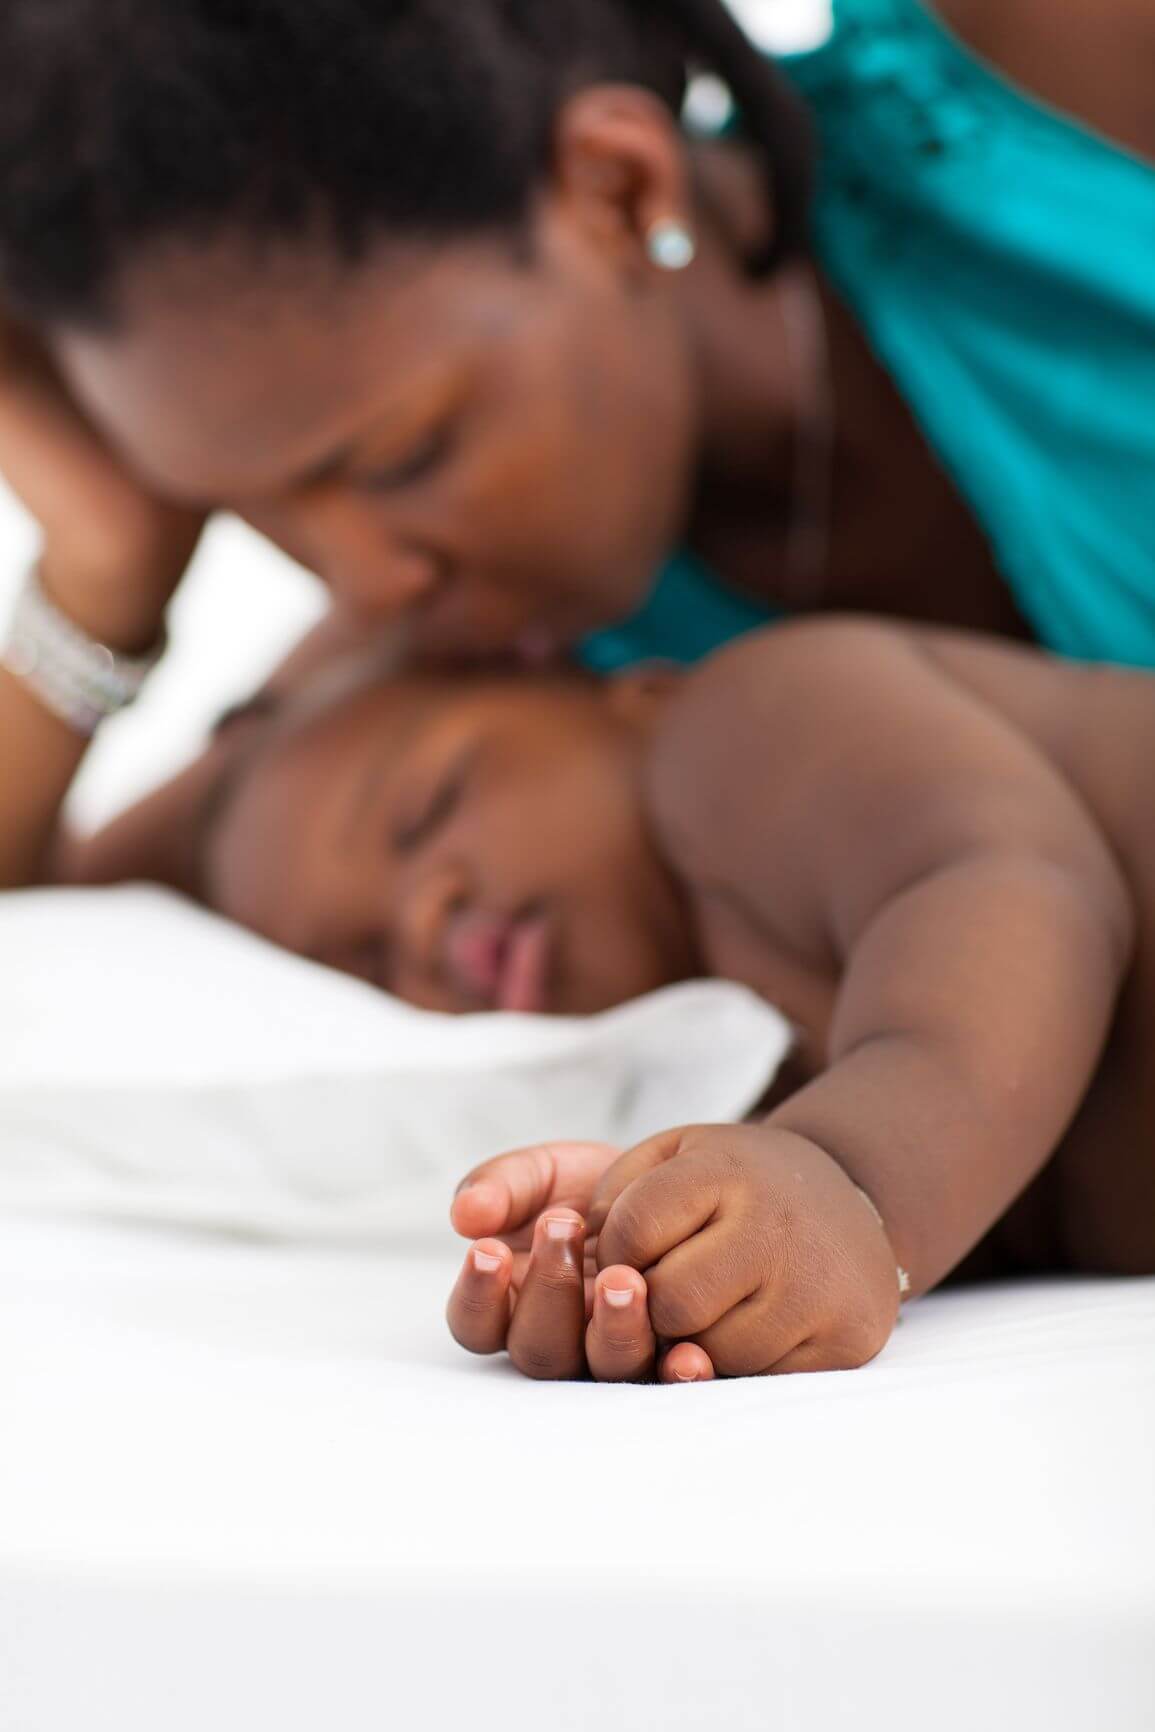 woman and her sleeping baby lying down, hands of baby are in focus